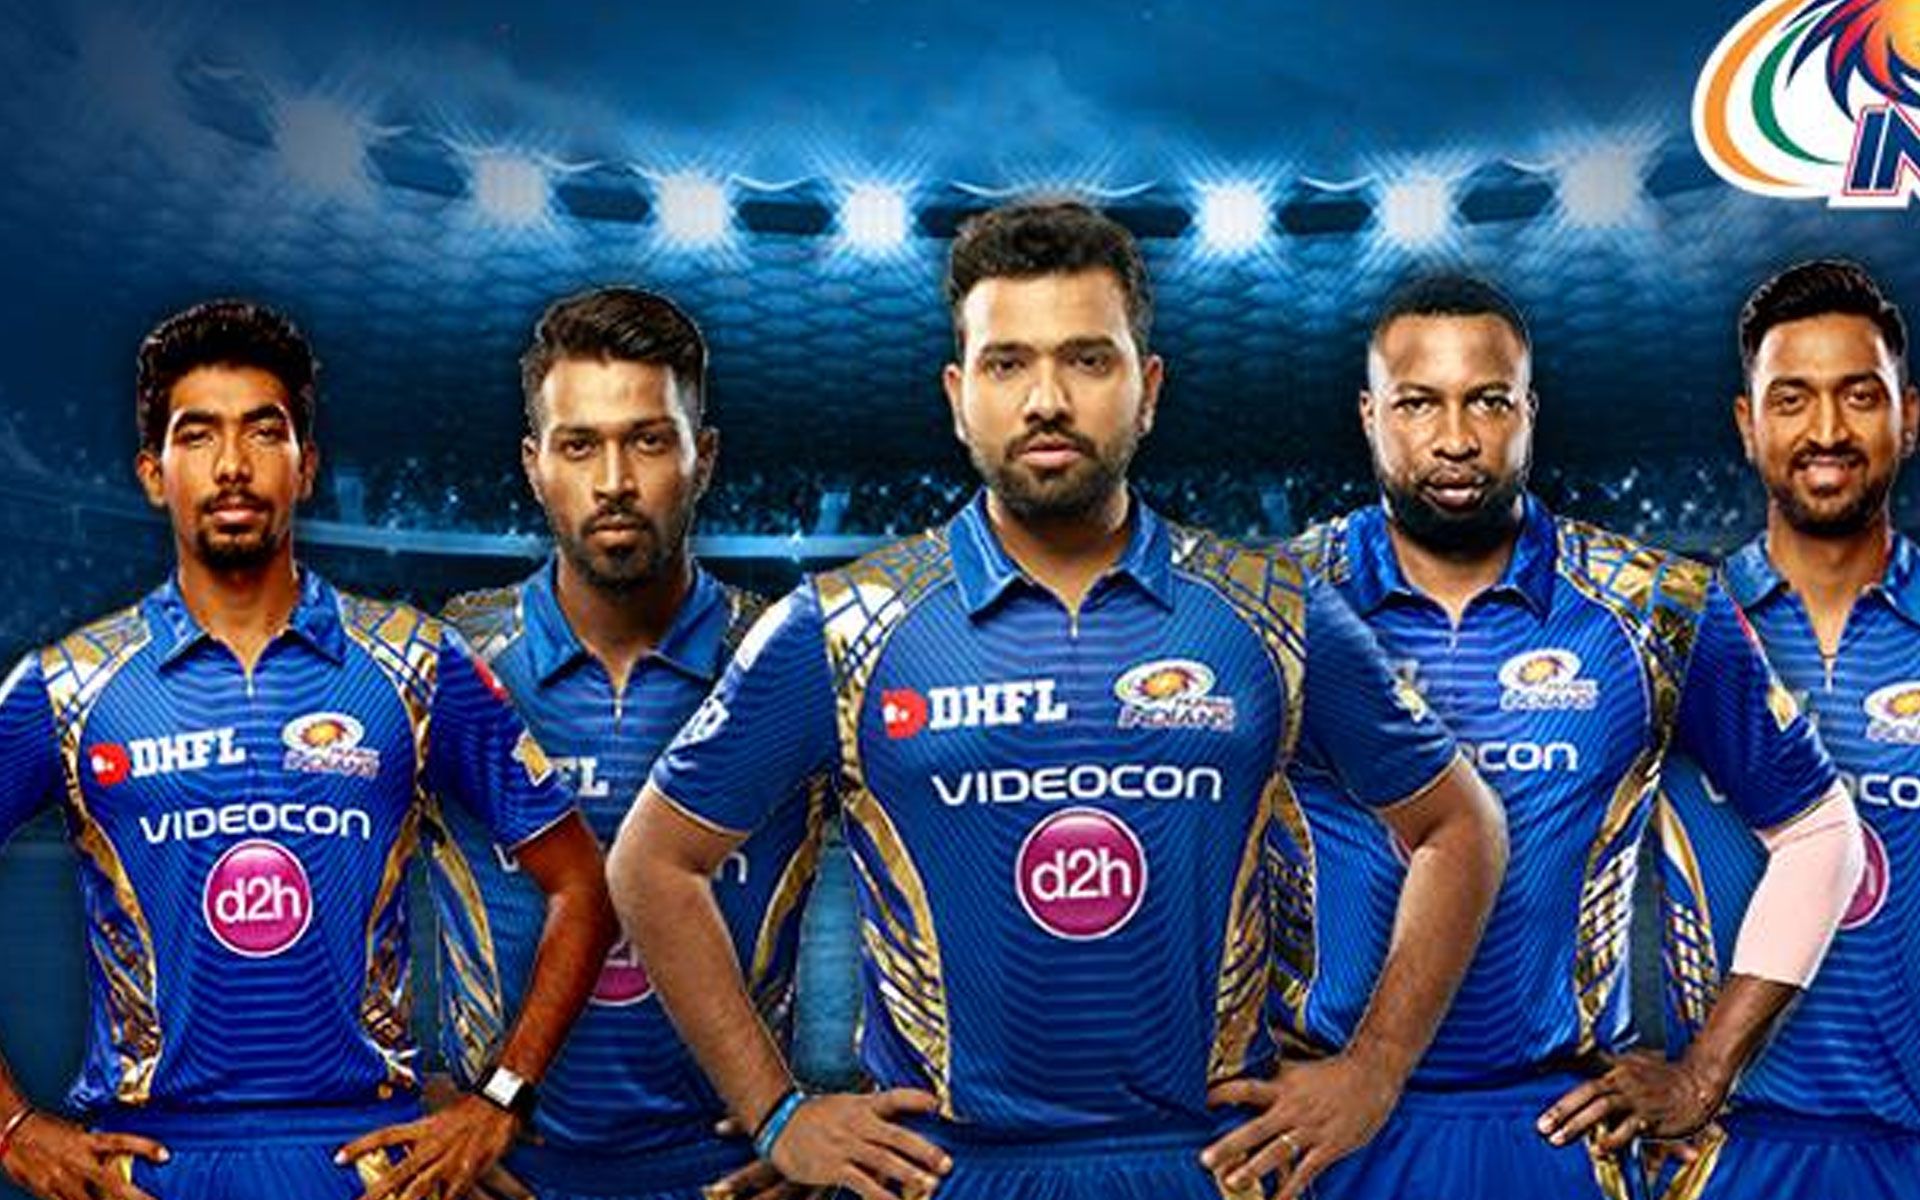 Netflix to produce unscripted series on Mumbai Indians